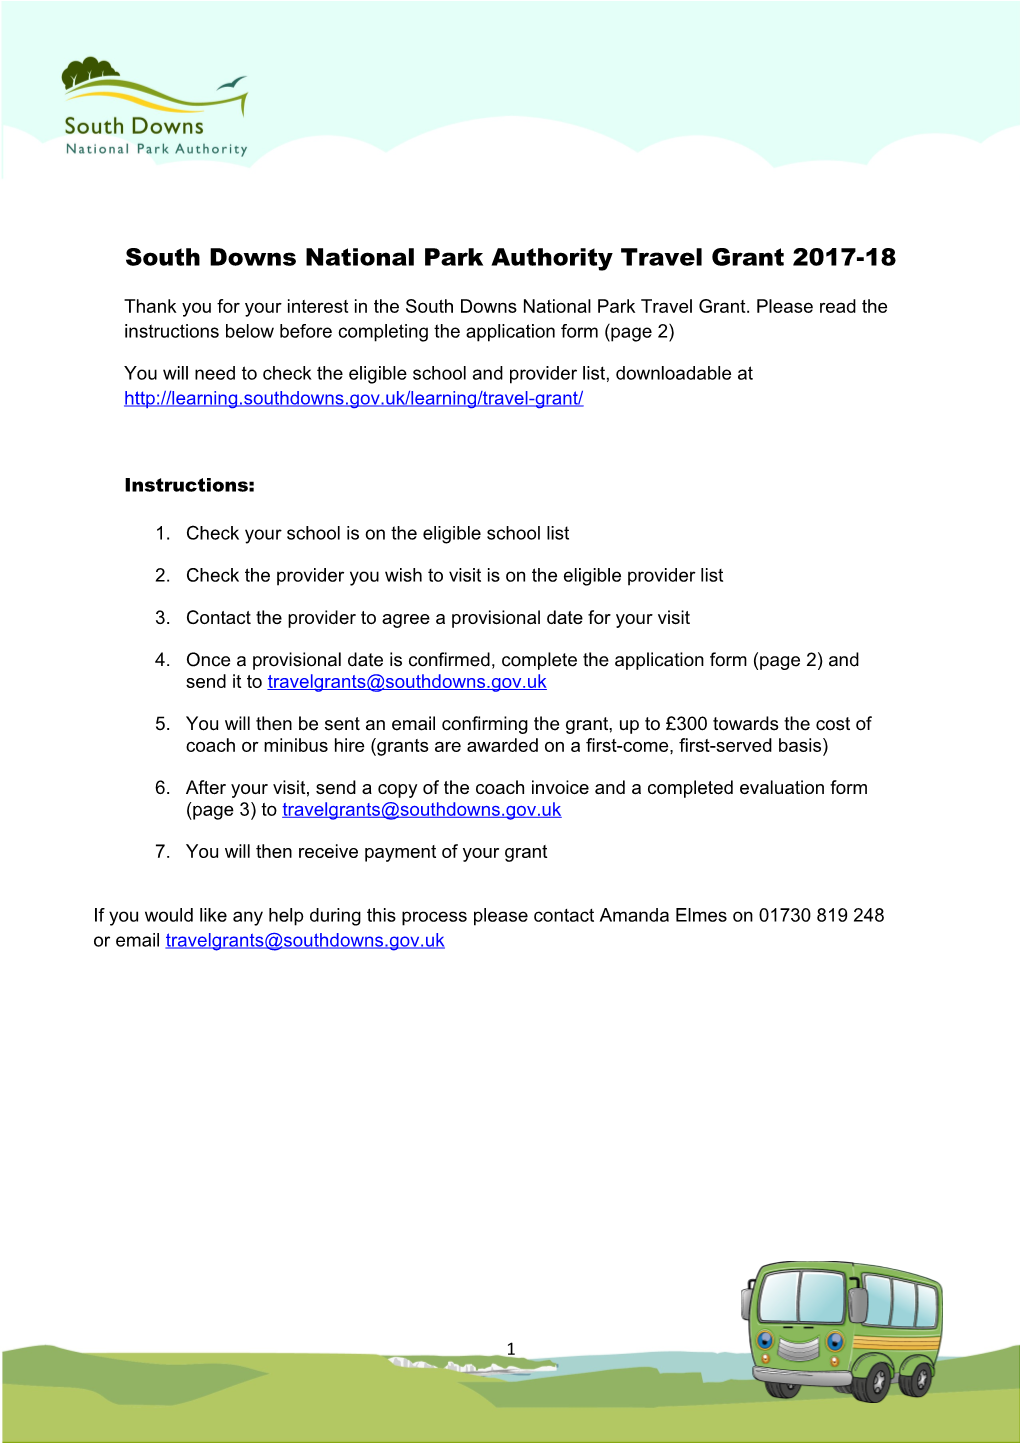 Applying for a South Downs National Park Authority